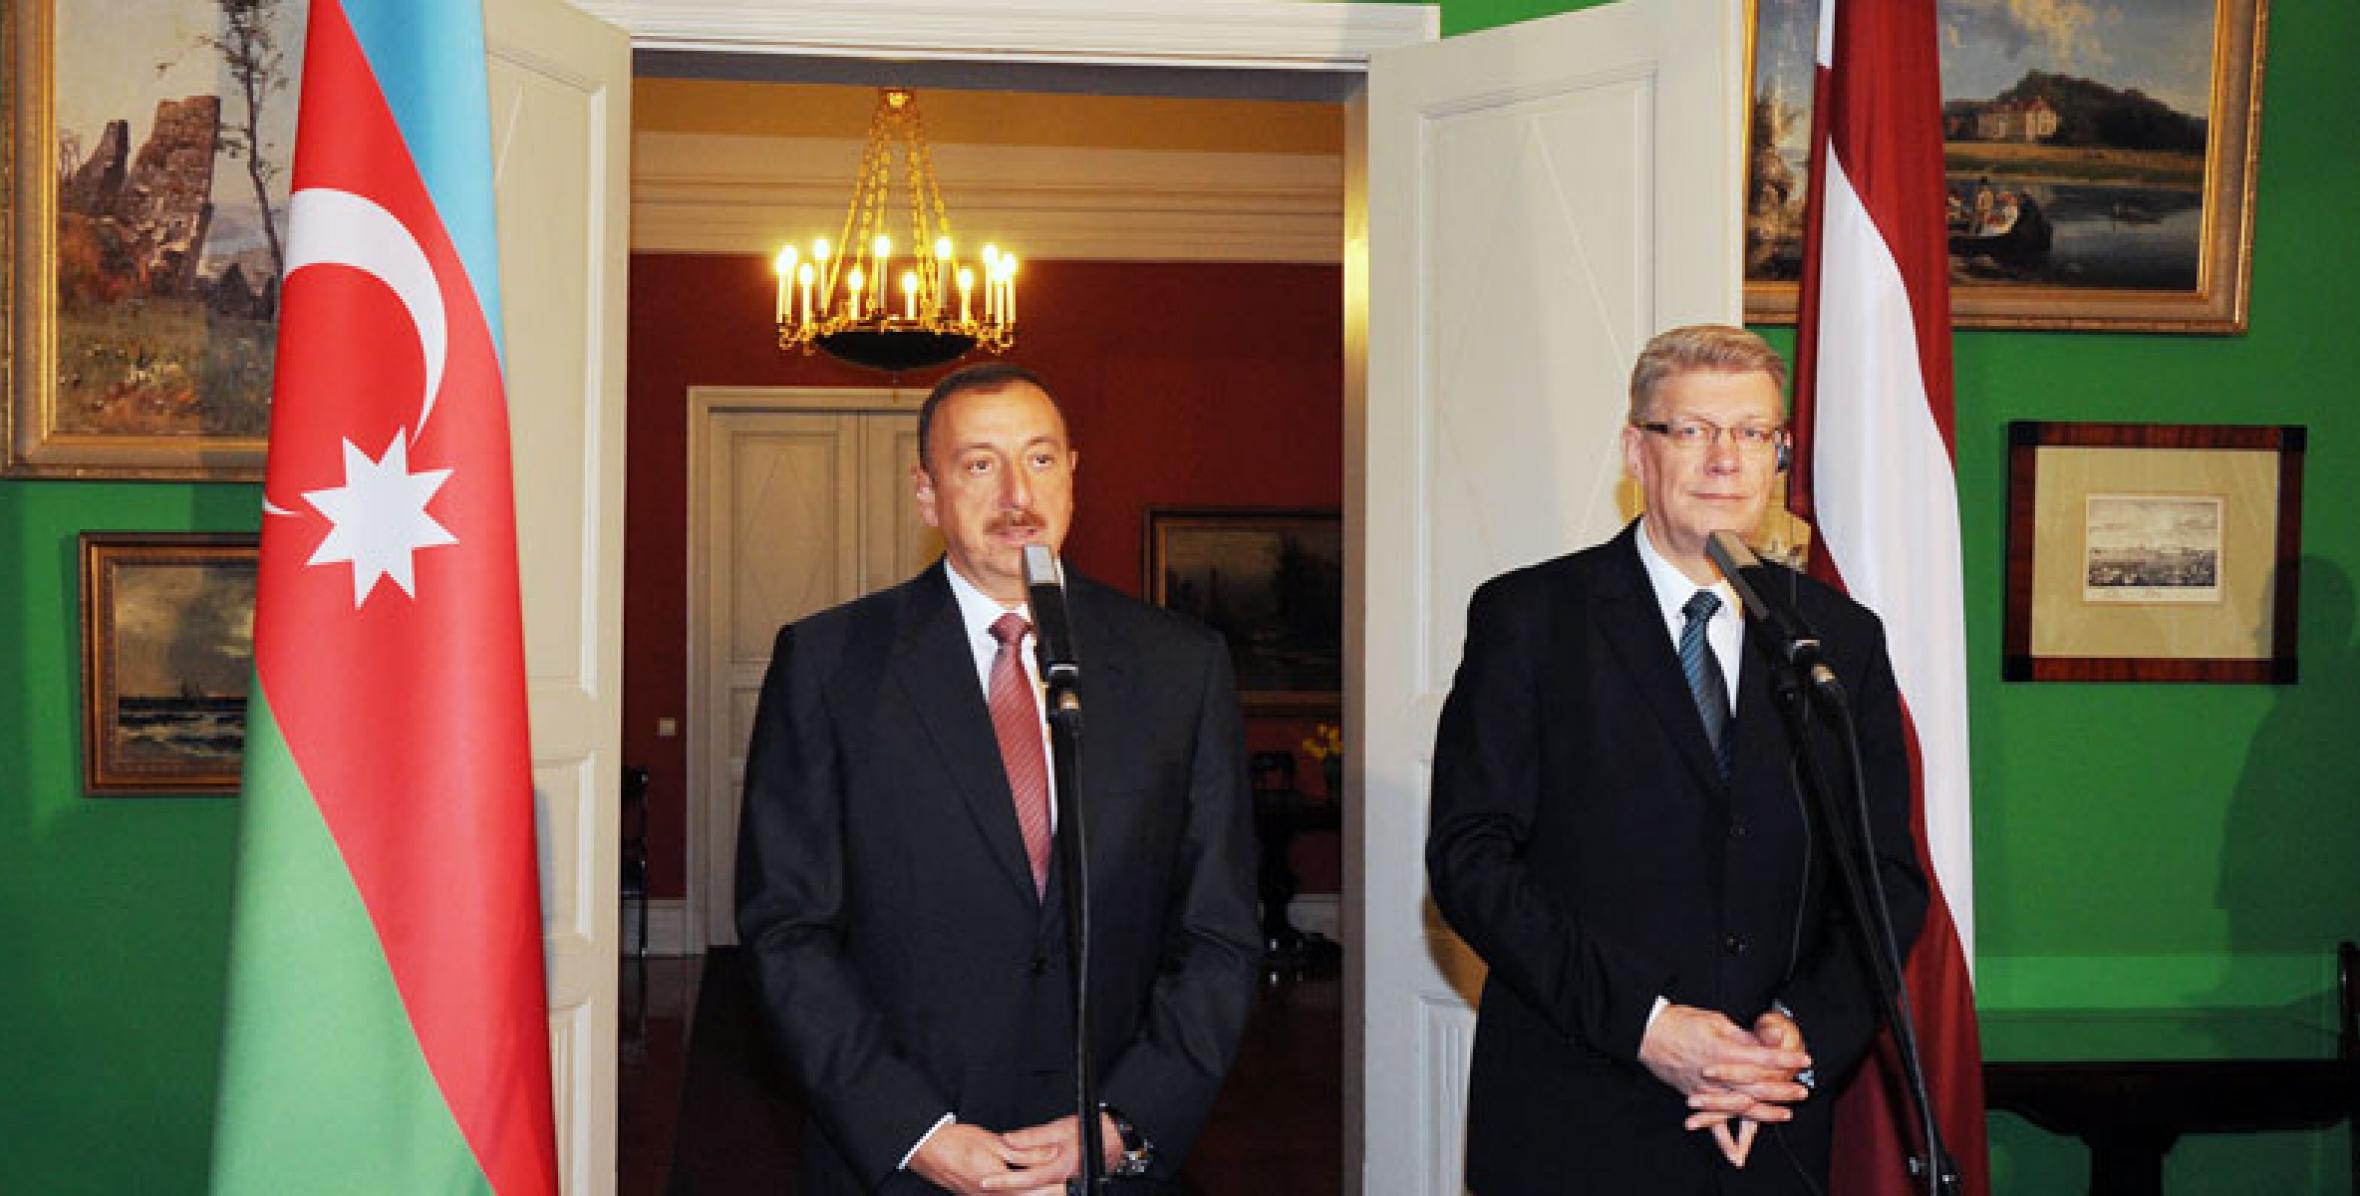 Presidents of Azerbaijan and Latvia held a joint press conference